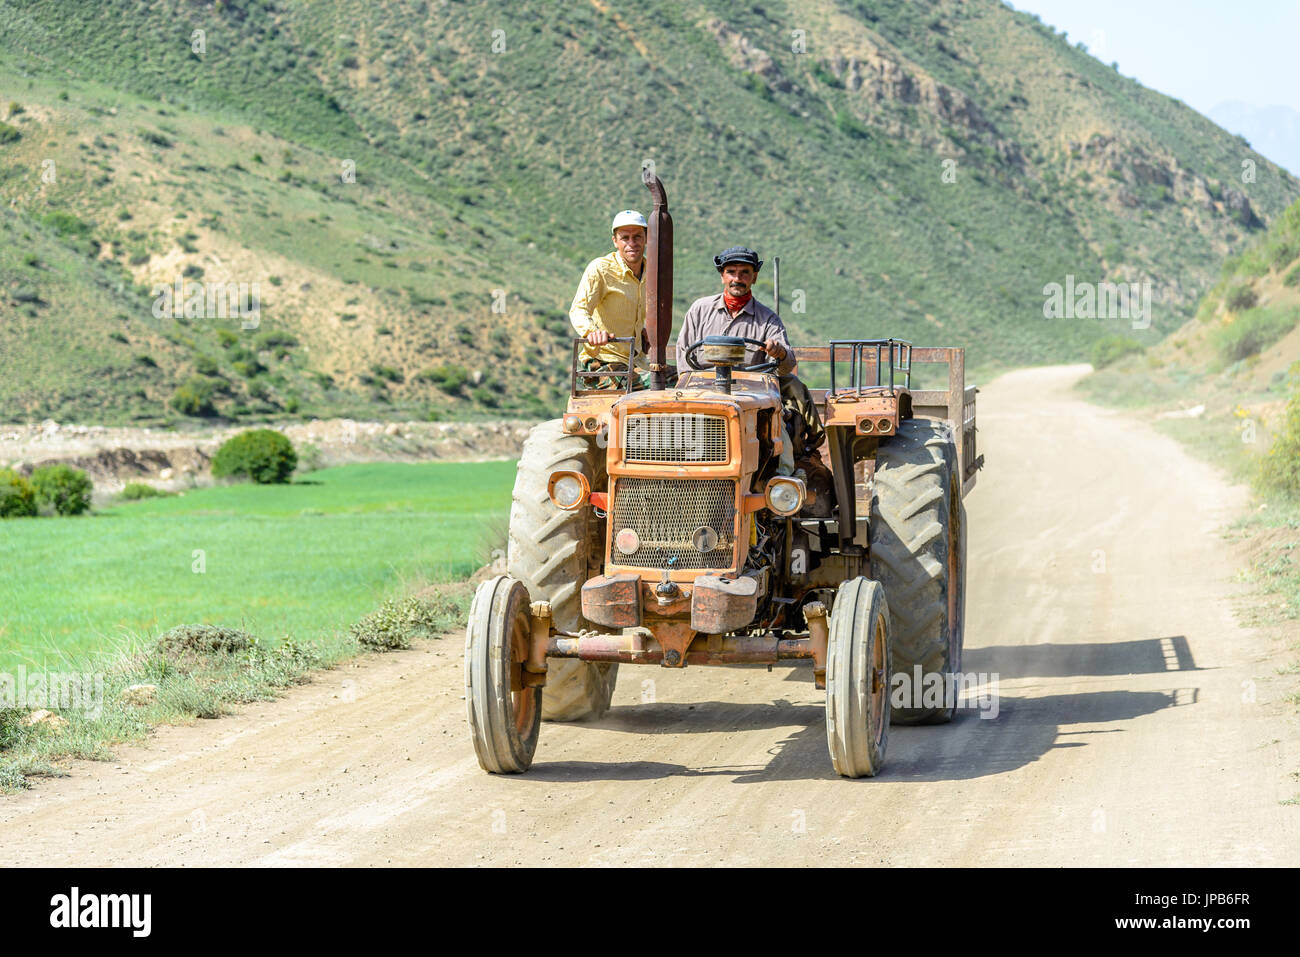 OROST, IRAN - MAY 03, 2015: traditional persian farmer on a tractor in the mountains of Iran Stock Photo